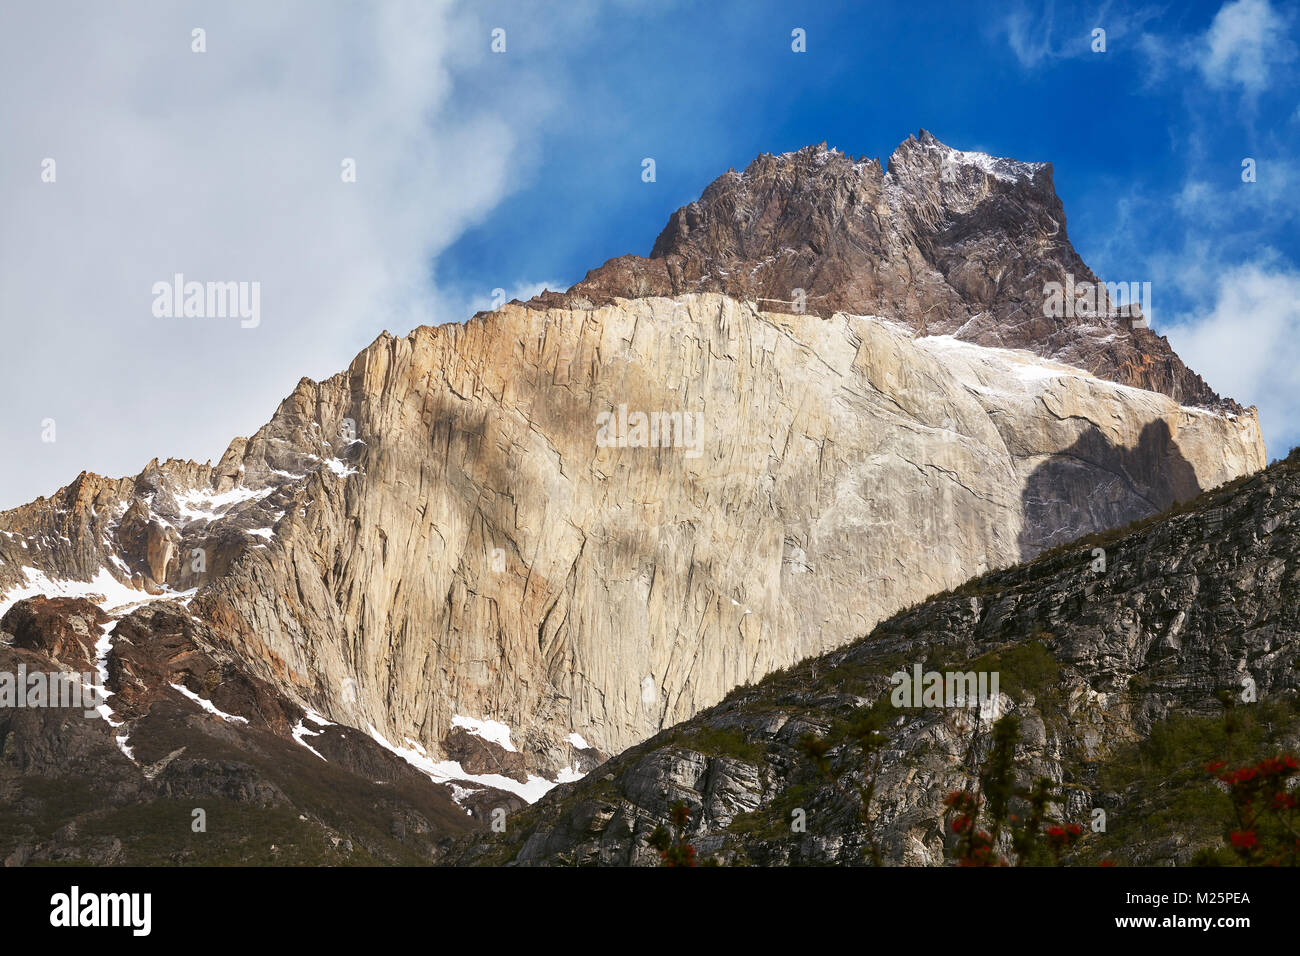 Close up picture of the Cuernos del Paine rock formations in the Torres del Paine National Park, Chile. Stock Photo